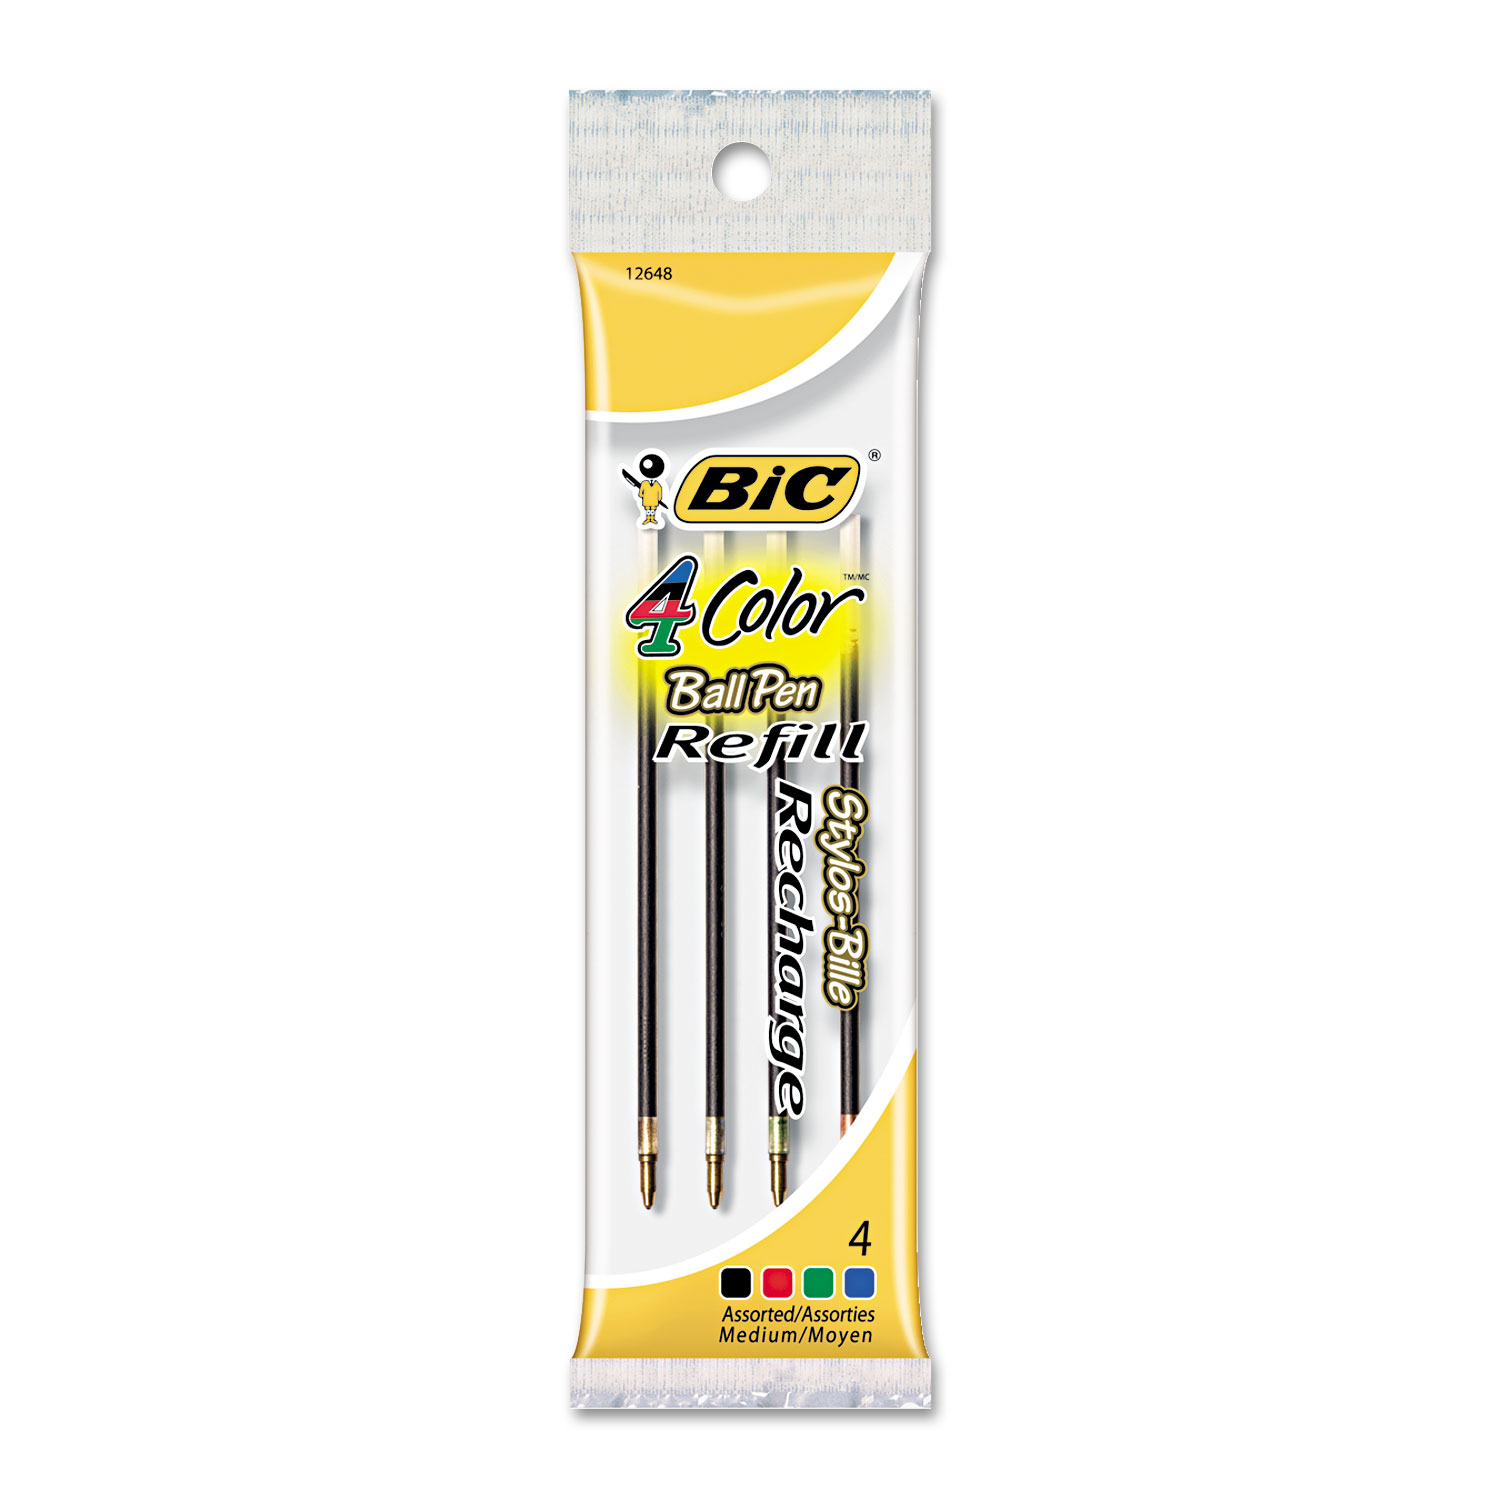  BIC M4M41 Refill for BIC 4-Color Retractable Ballpoint Pens, Medium Point, Assorted Ink Colors, 4/Pack (BICMRM41) 